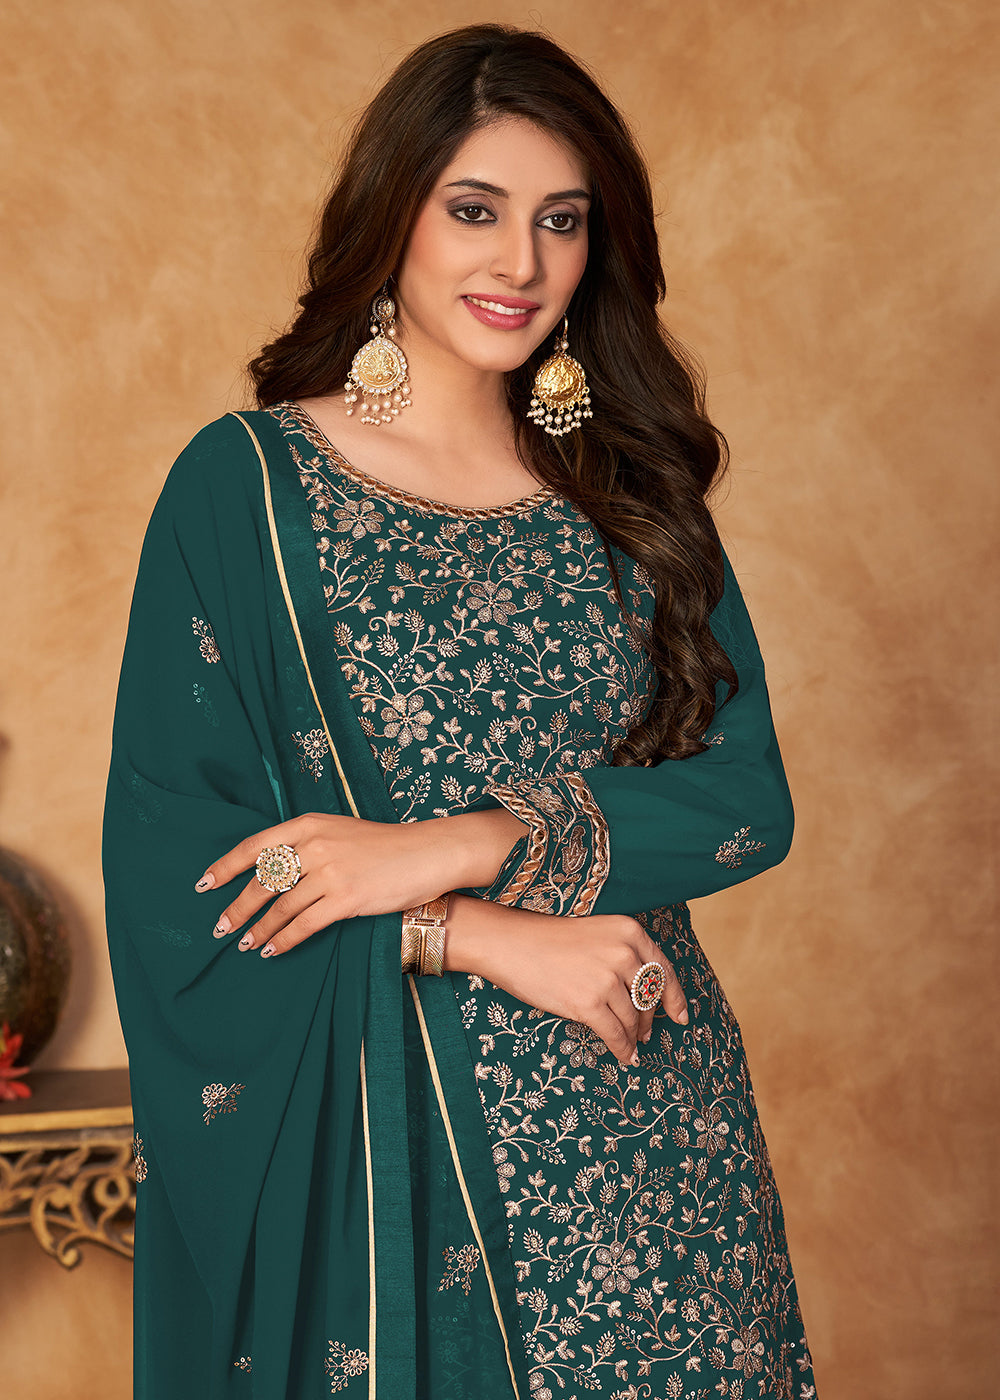 Shop Now Fantastic Rama Green Embroidered Ceremonial Gharara Suit Online at Empress Clothing in USA, UK, Canada, Germany & Worldwide. 